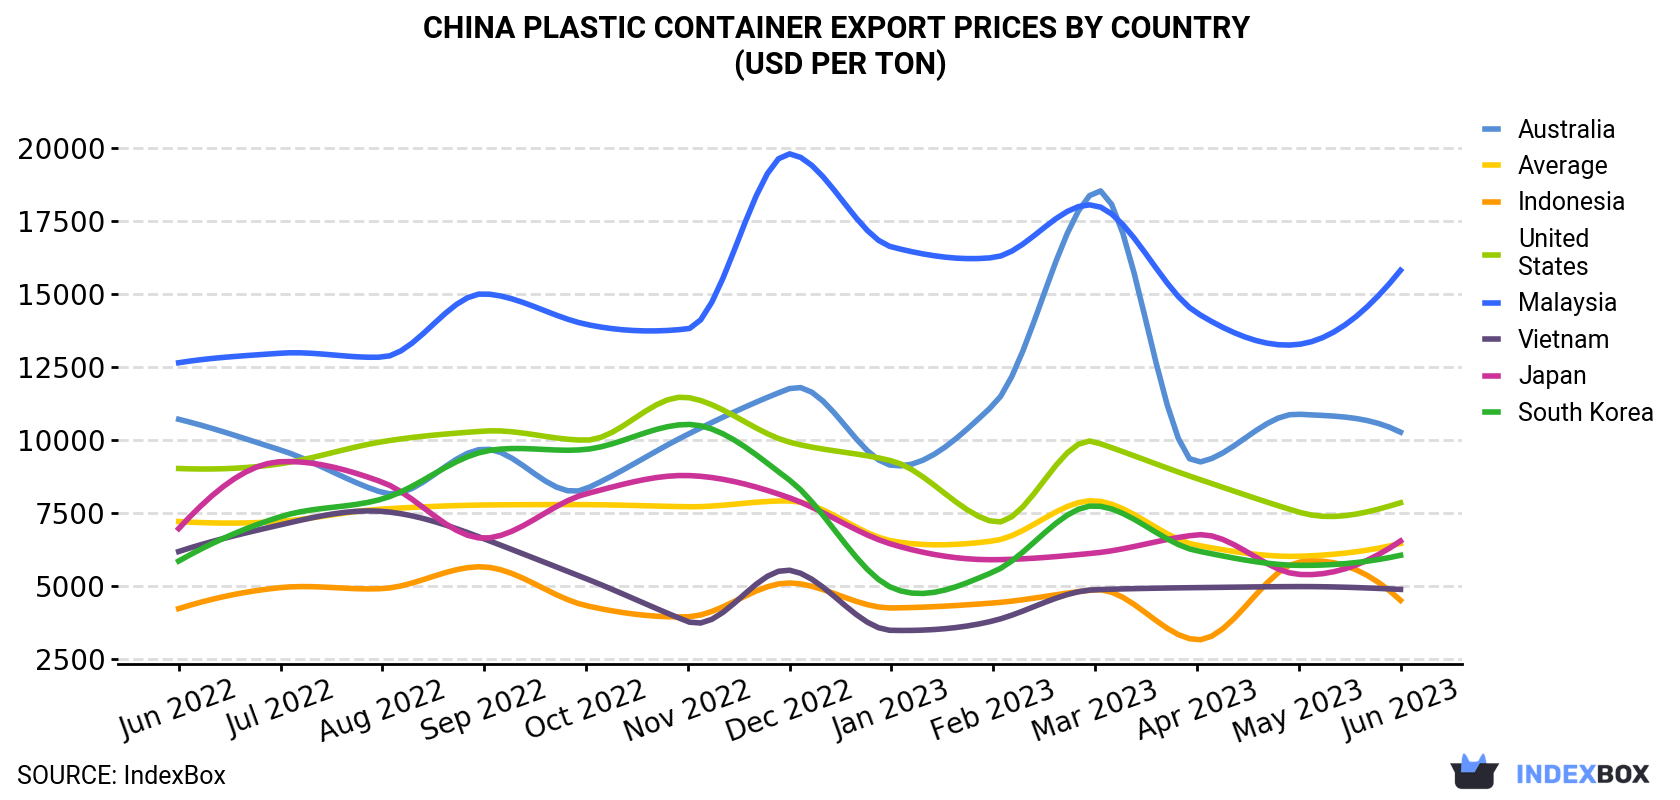 China Plastic Container Export Prices By Country (USD Per Ton)